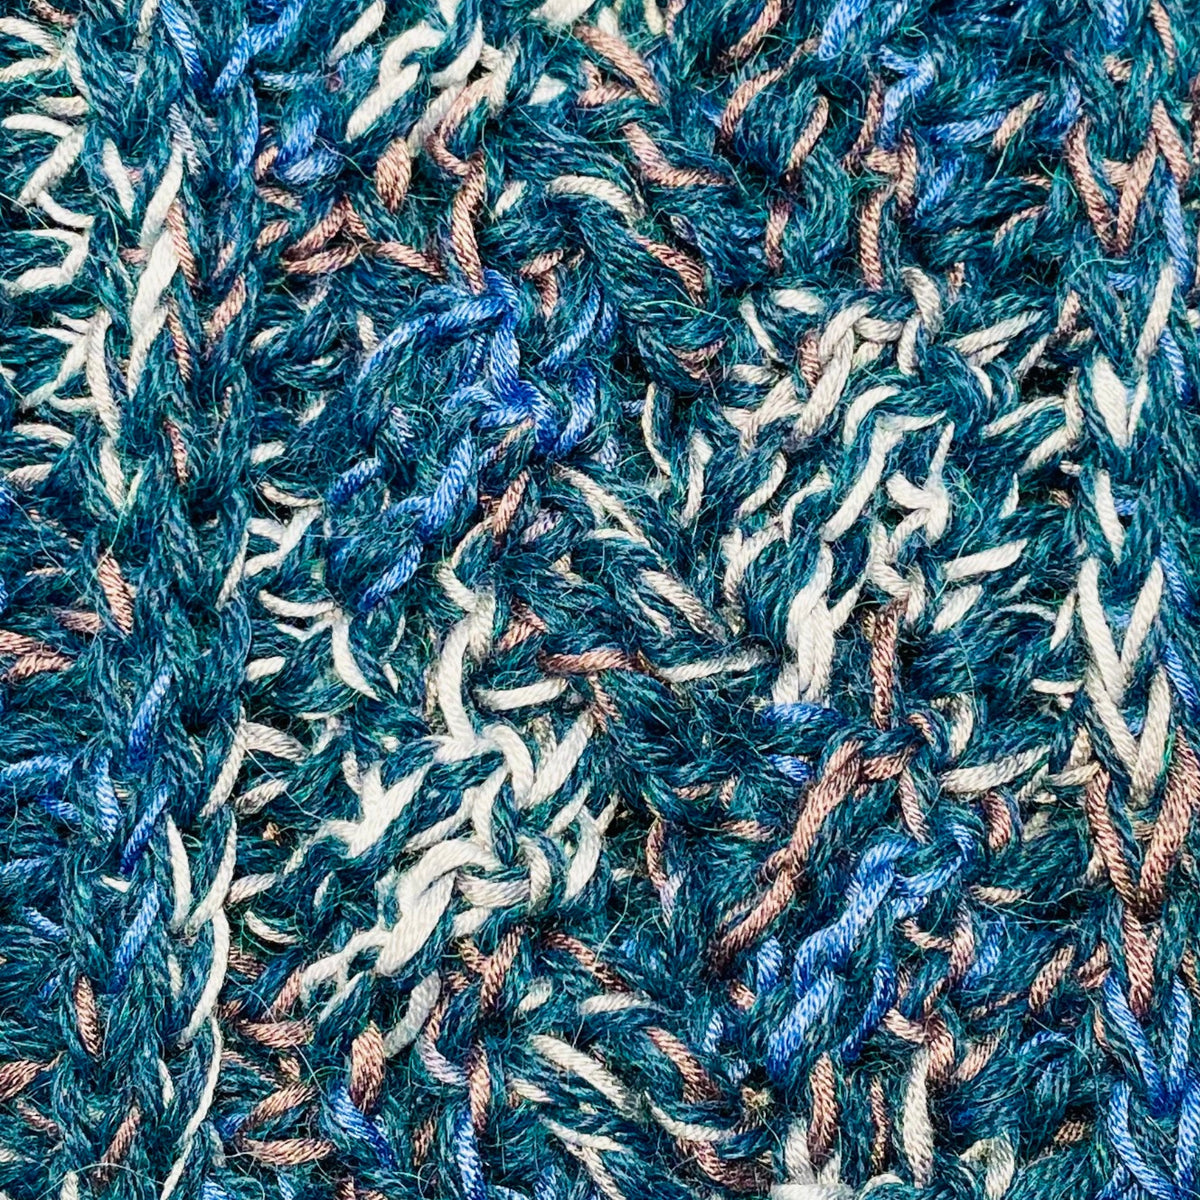 A close up photograph of the warm cozy handmade knit crochet Alpacas of Montana scarf, a mixture of the colors ocean blue, dark turquoise, cobalt, cerulean, gray, and white. 